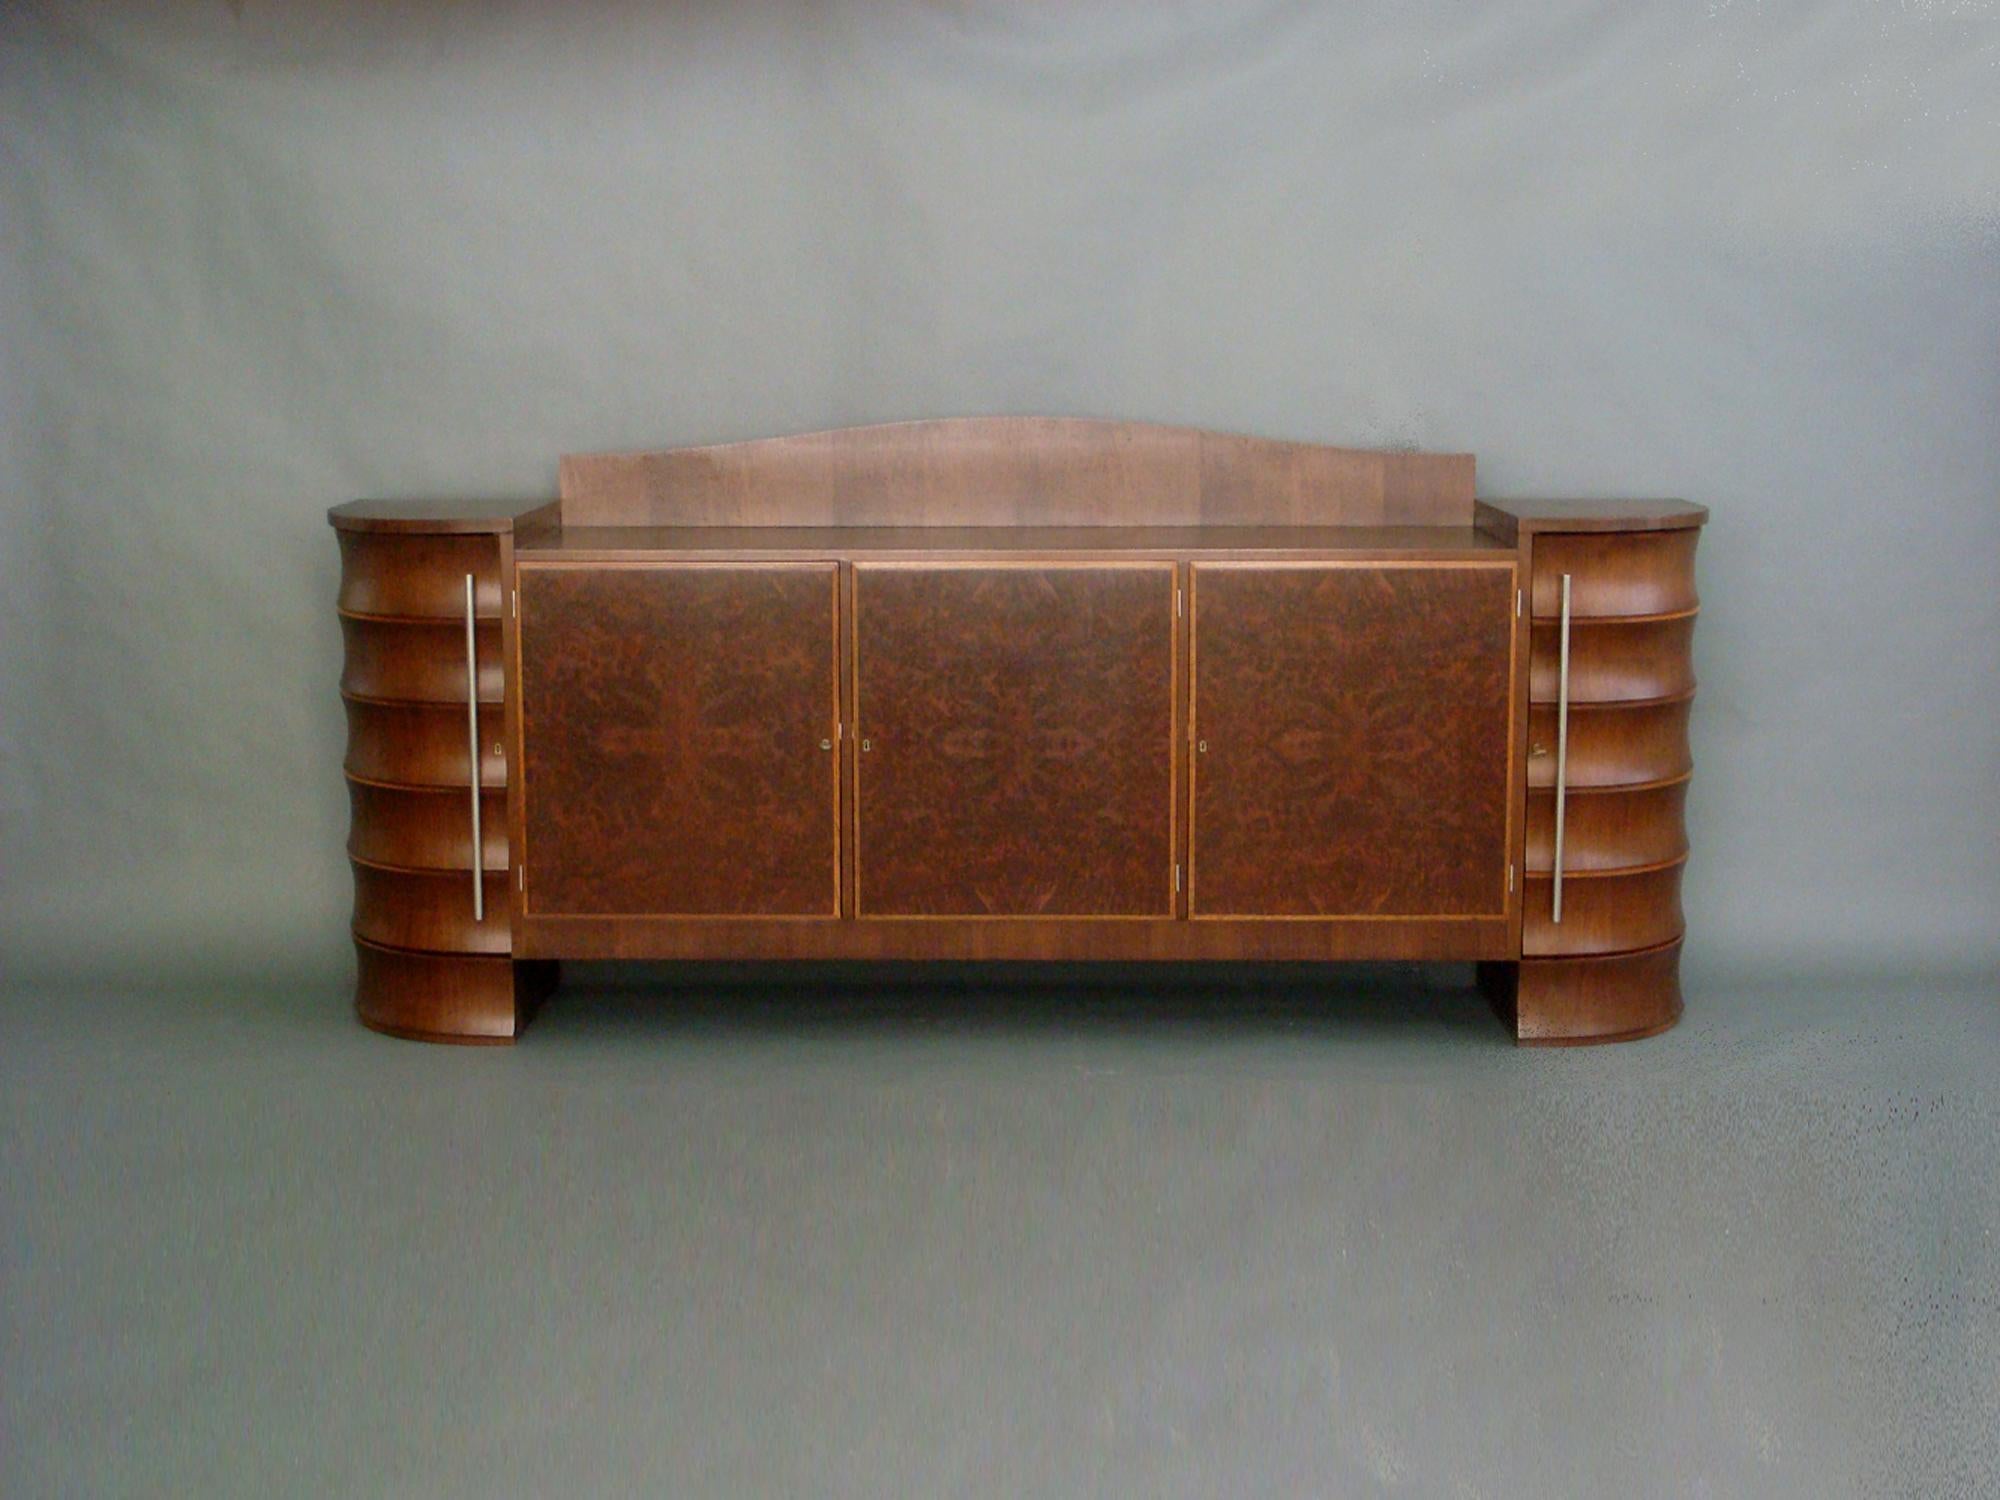 Fine French Art Deco walnut and burled walnut sideboard by Rene Prou in collaboration with Albert Guenot.
3 central doors in burled walnut et 2 curved side doors with vertical chrome pulls. 3 interior drawers.
Documented.